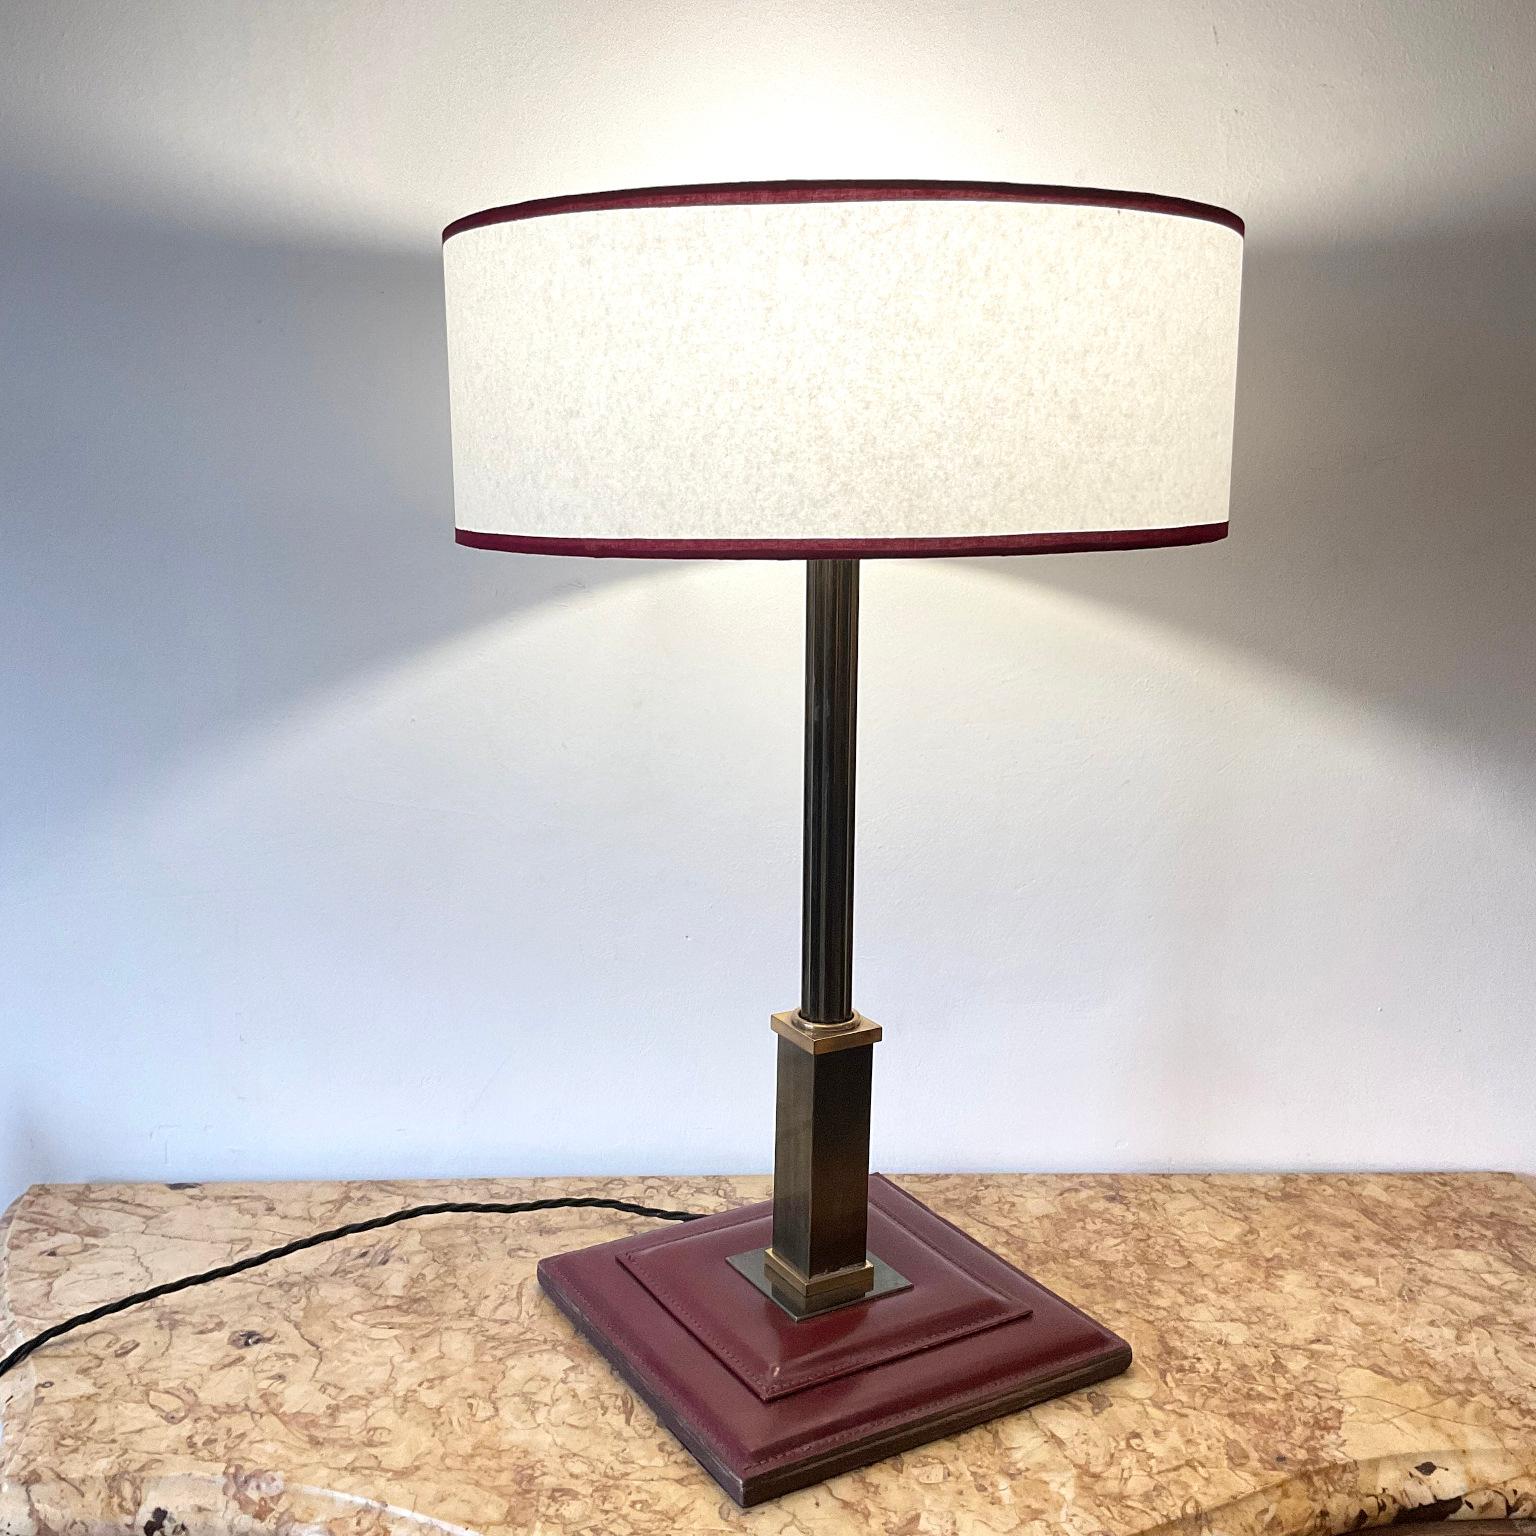 Brass 1950s Table Lamp Attributed to Maison Longchamp France in Burgundy Leather